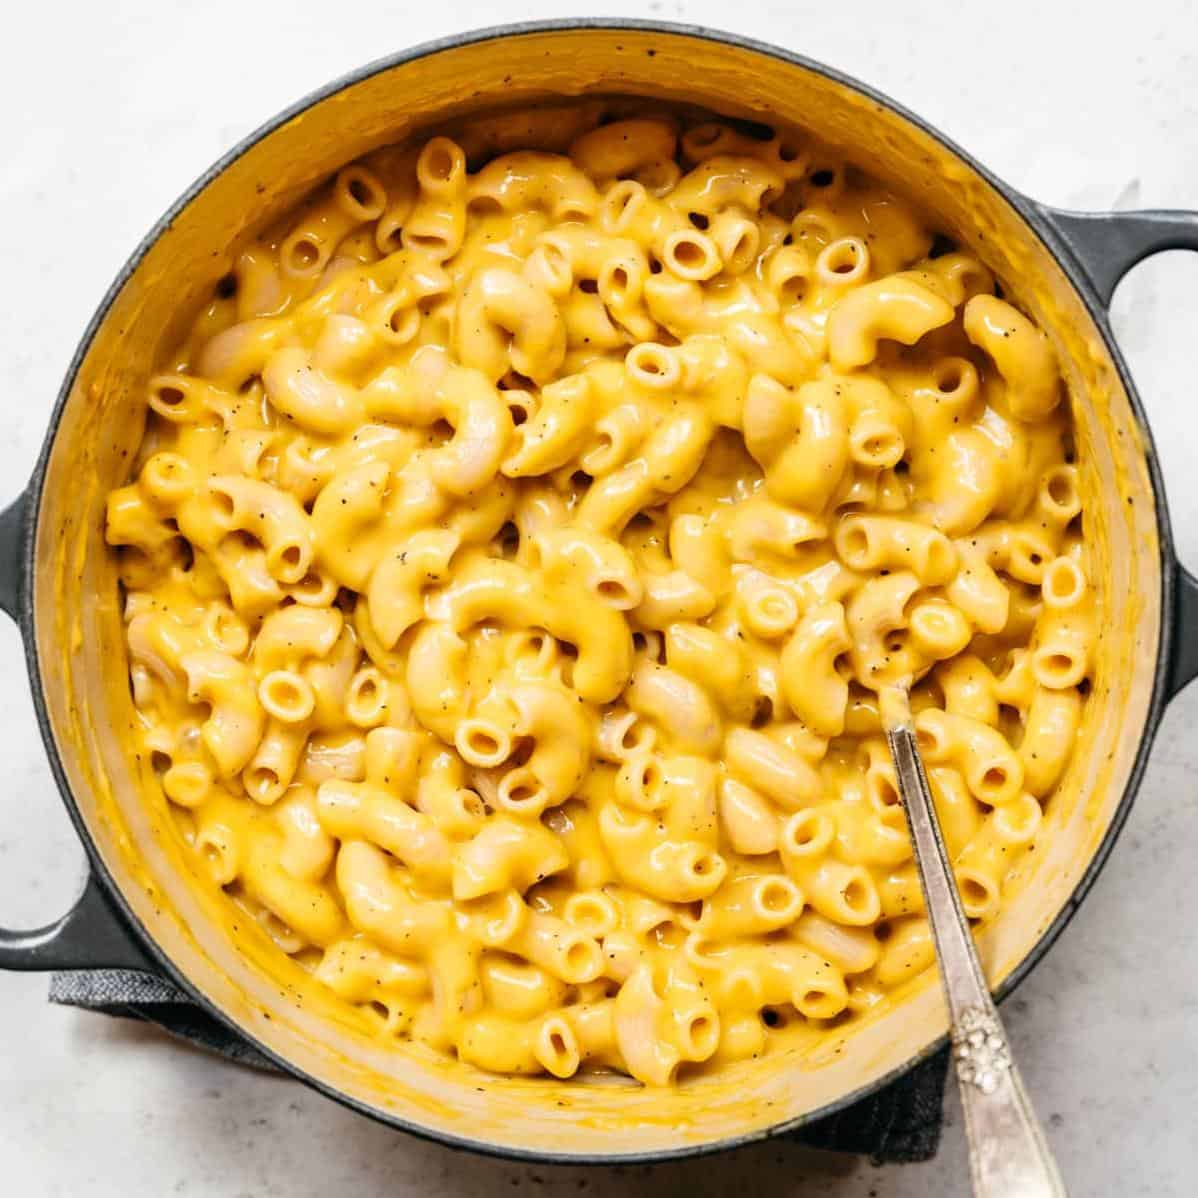  Get ready for carb heaven with this mouth-watering bowl of vegan mac and cheese.